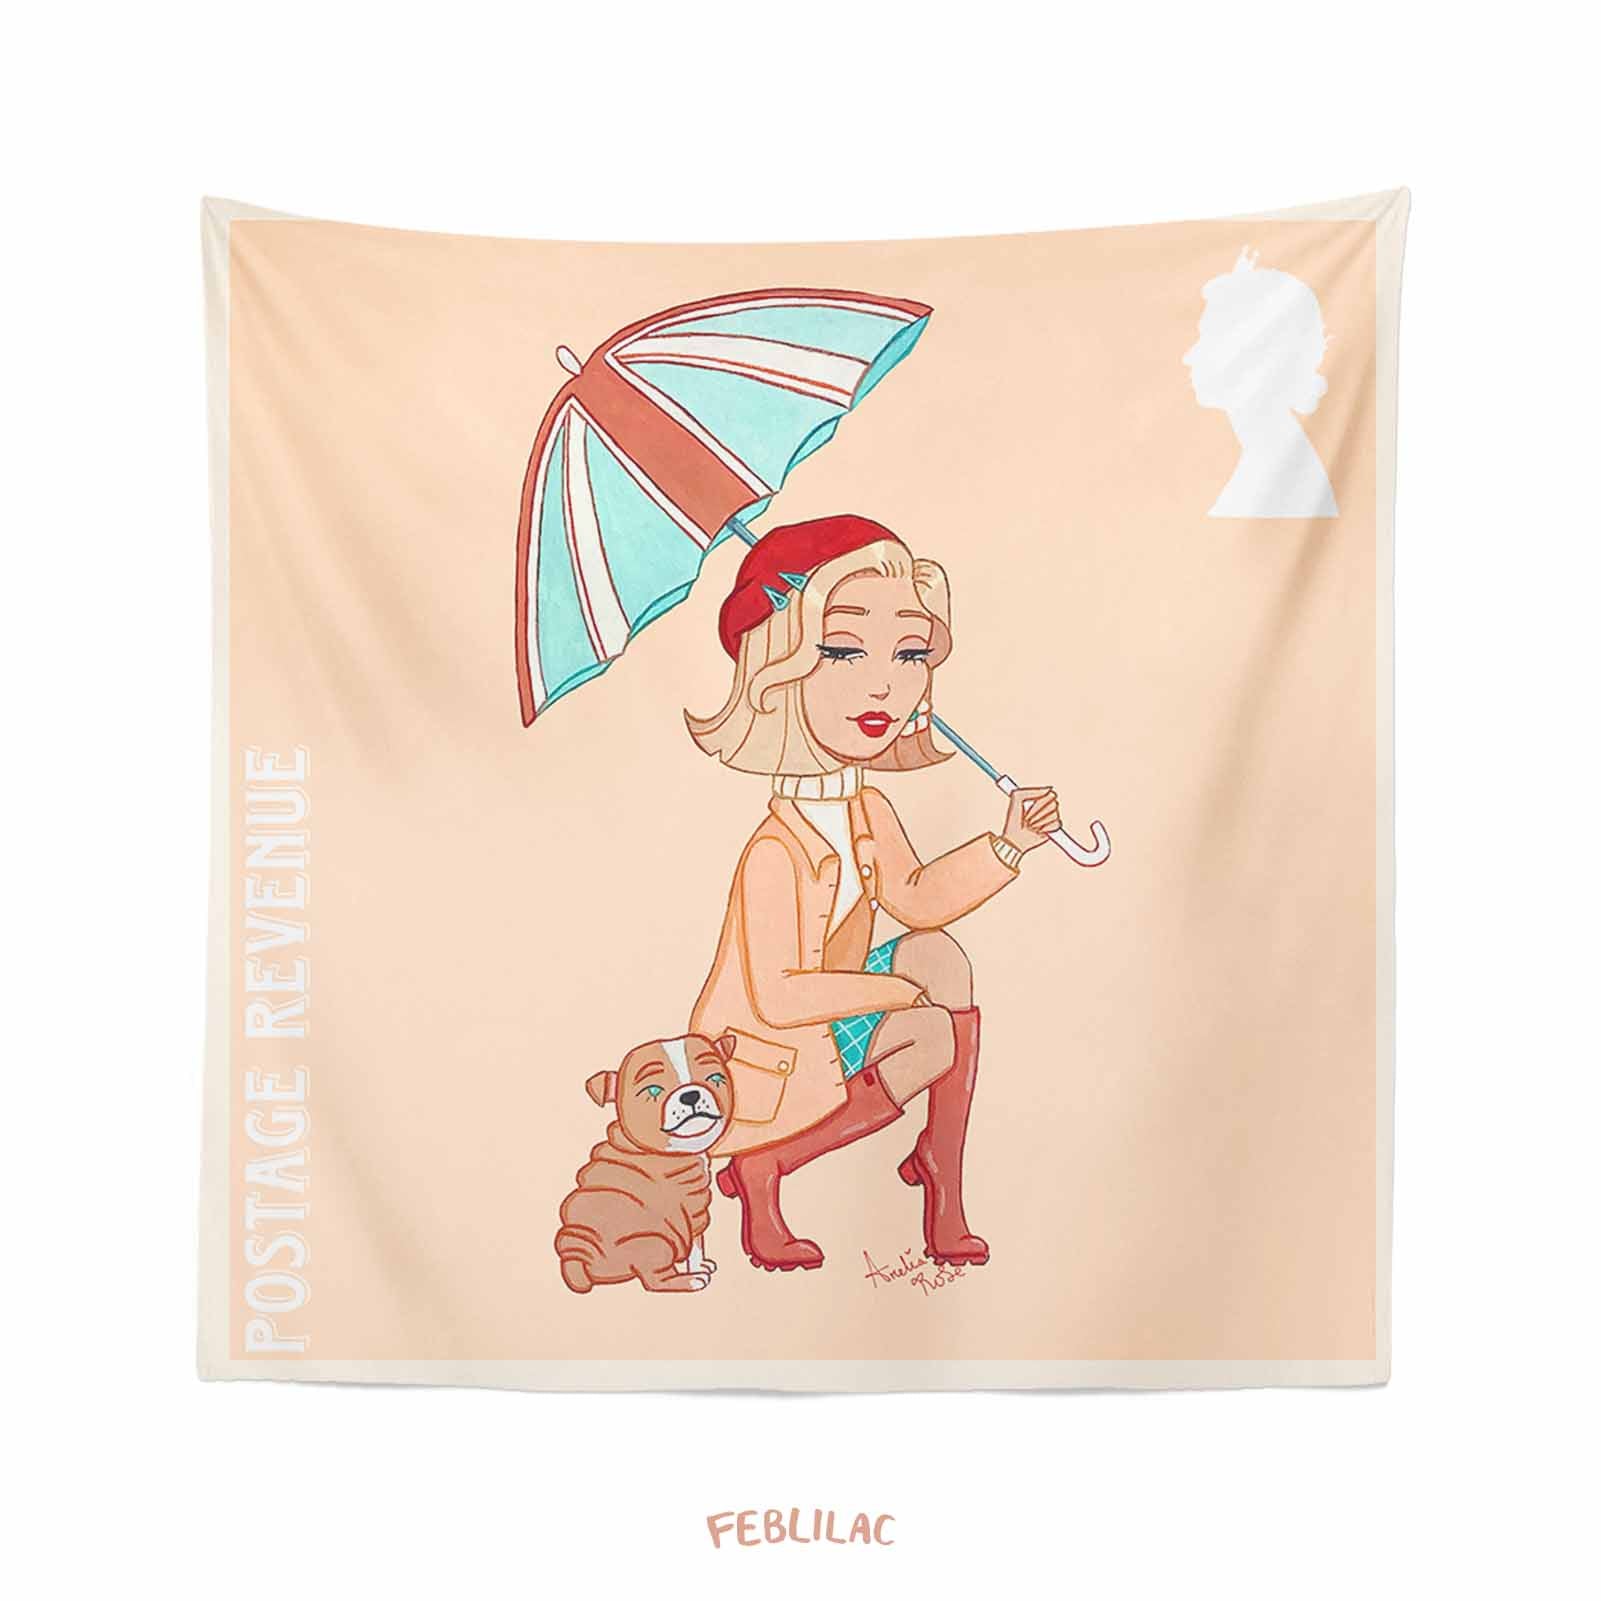 Feblilac Rainy Days Tapestry by AmeliaRose Illustrations from UK